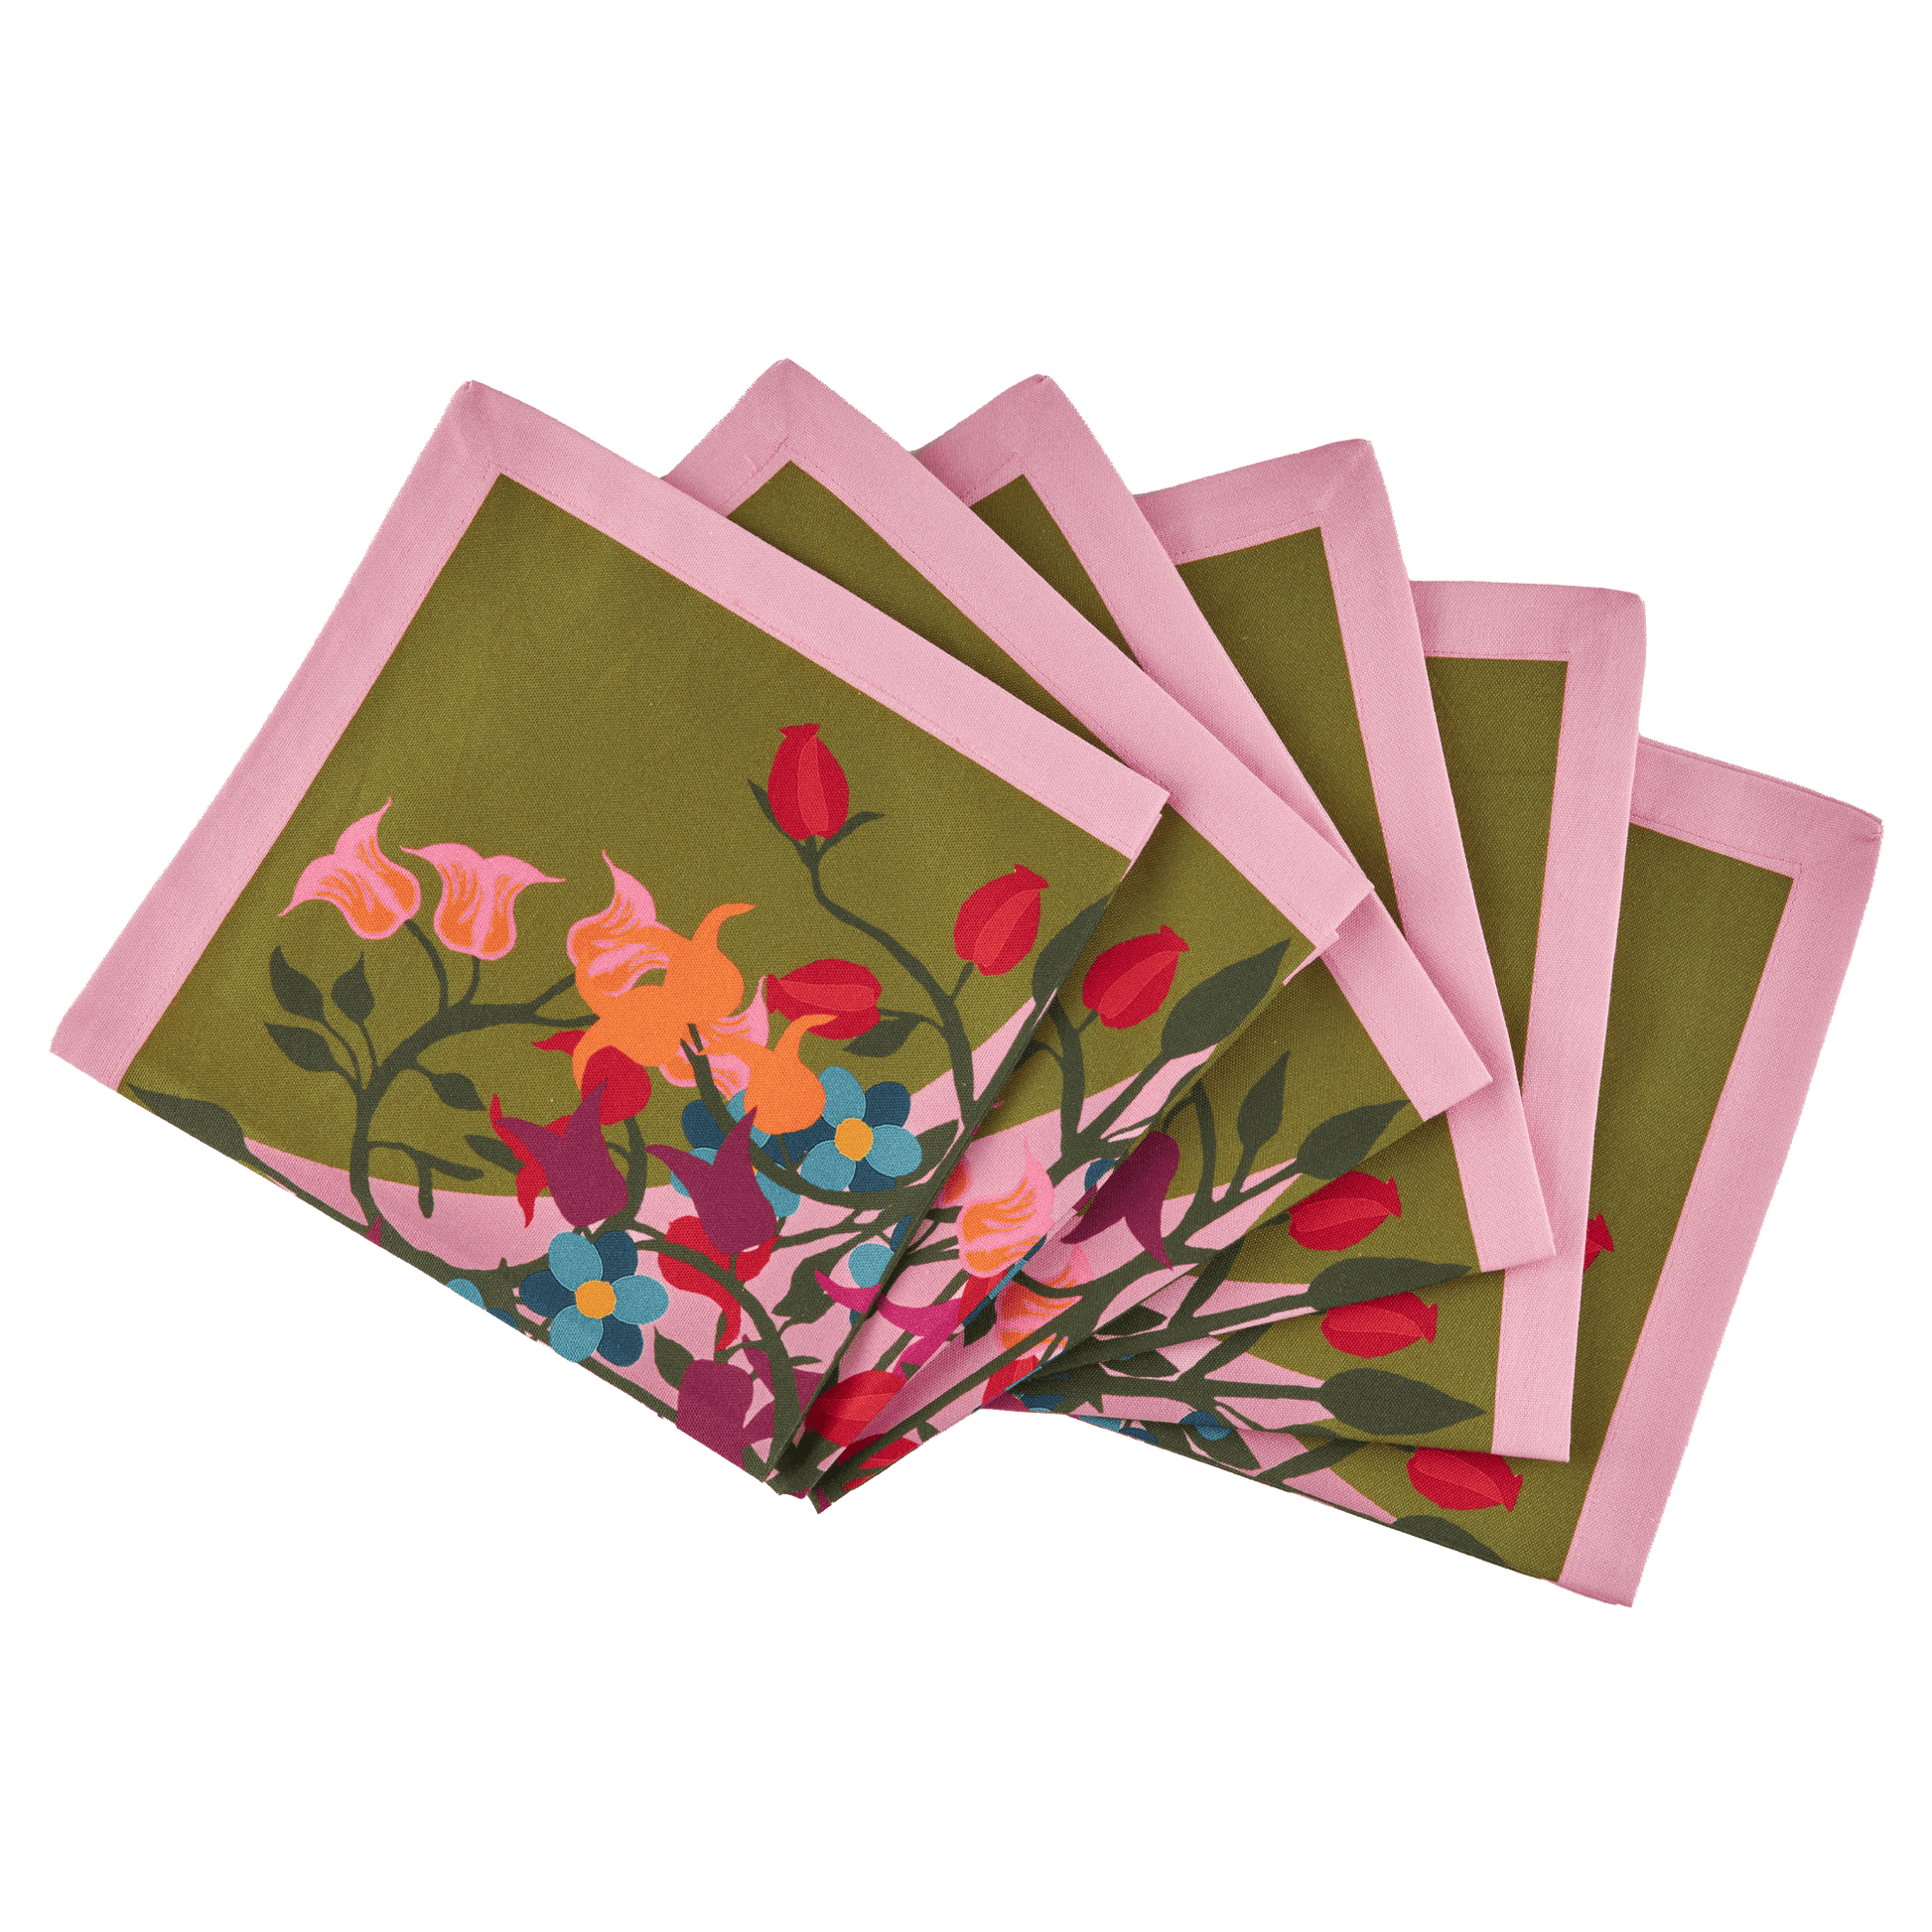 Six organic cotton napkins printed with green and pink floral and geometric motifs